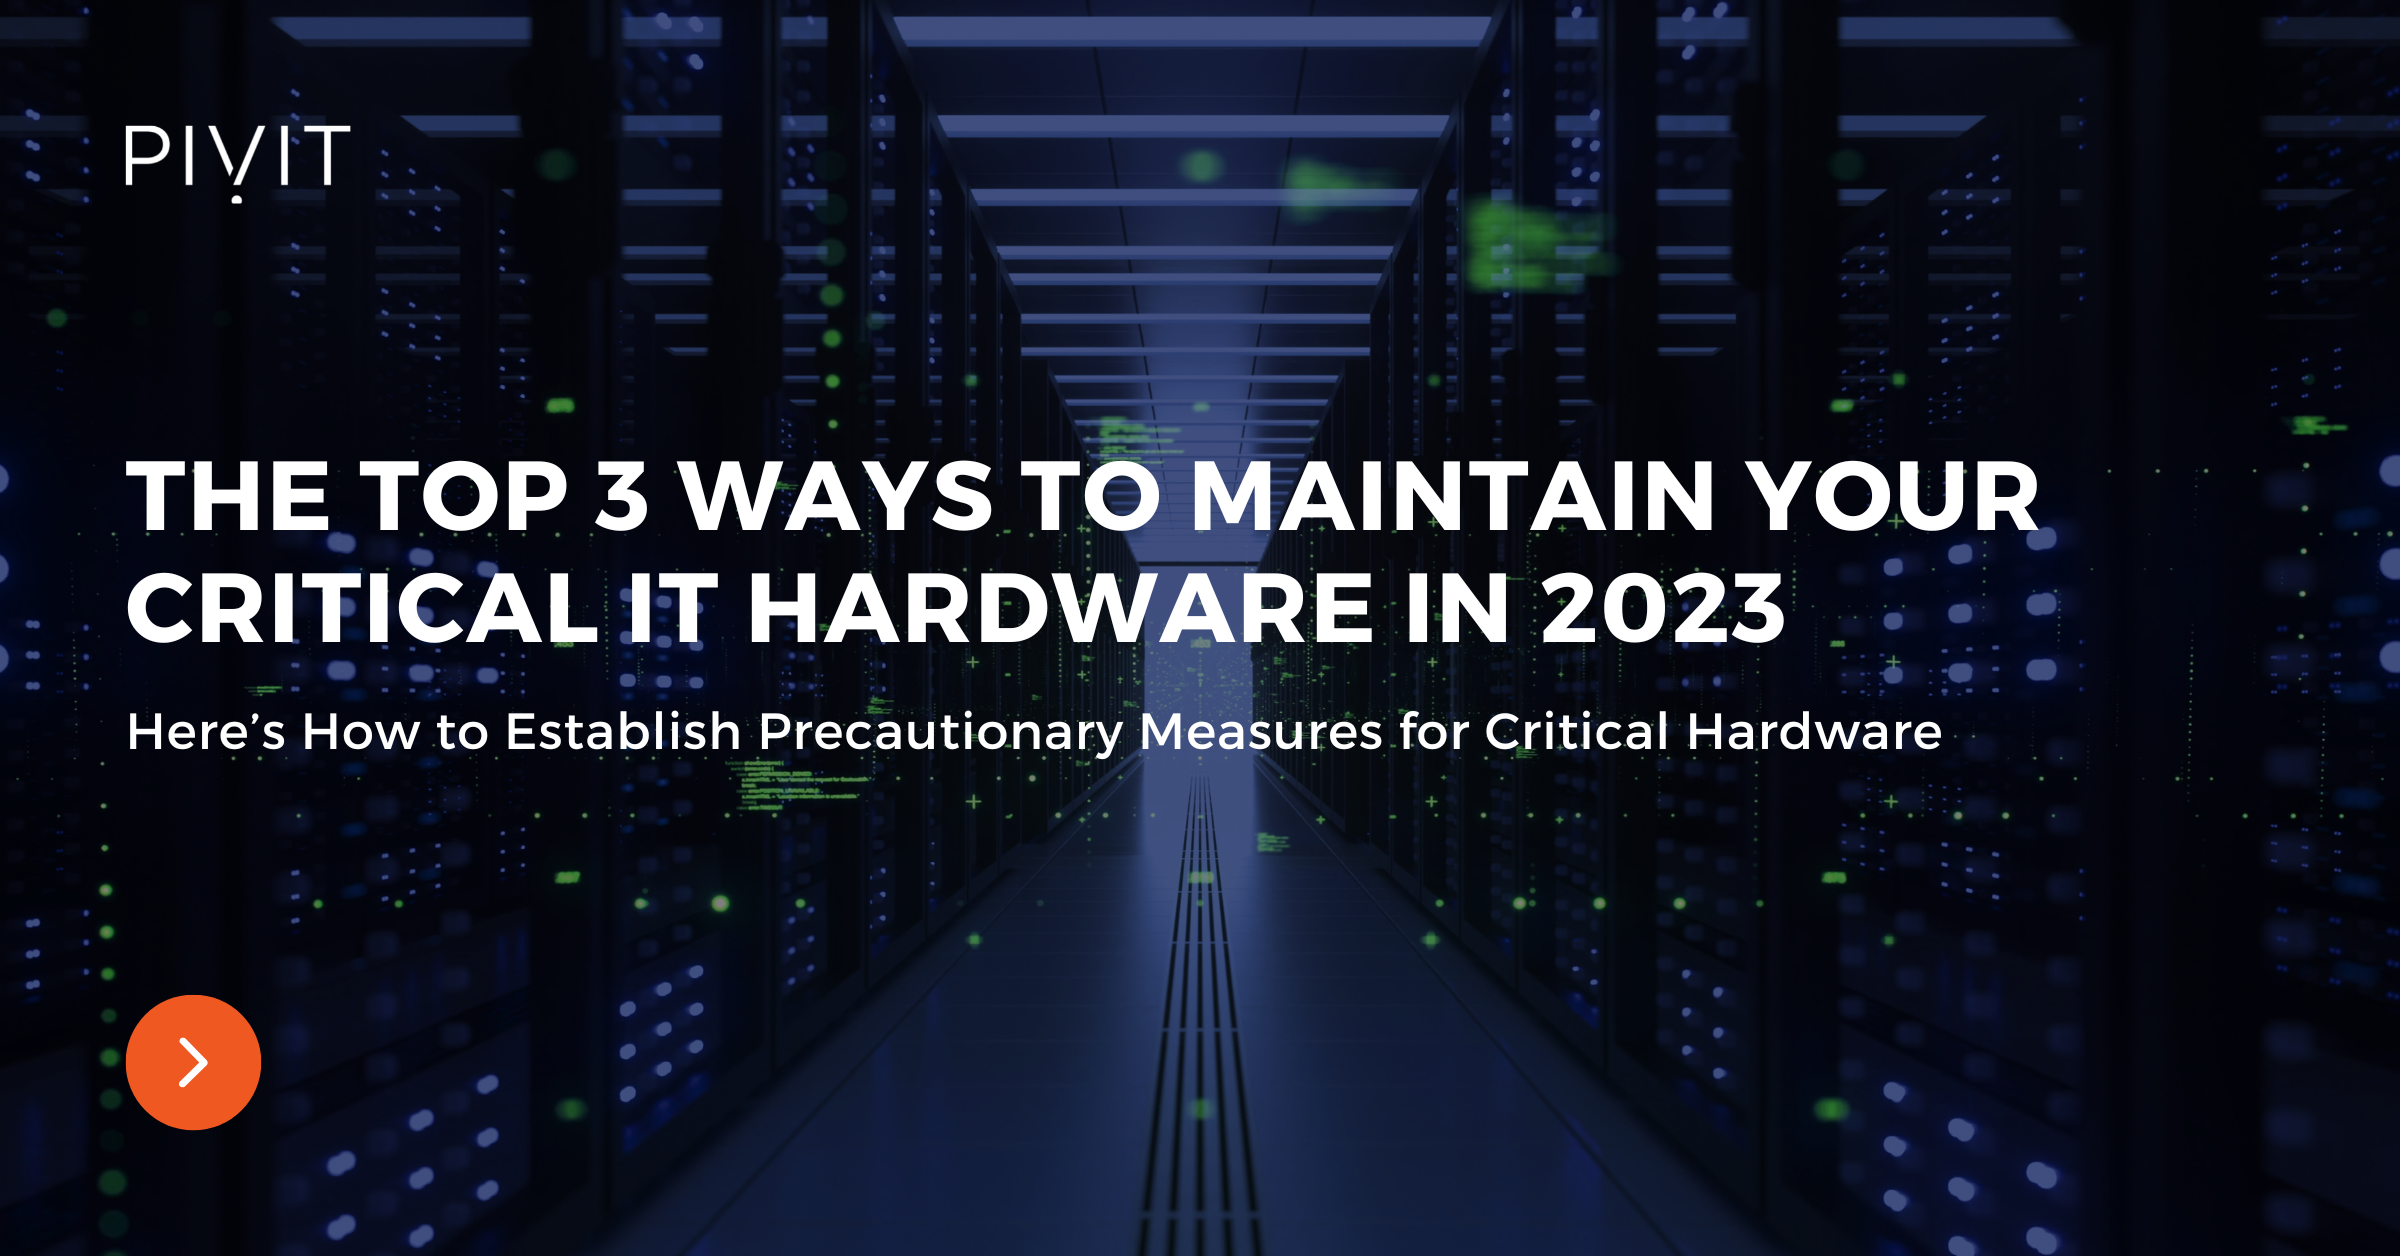 The Top 3 Ways to Maintain Your Critical IT Hardware in 2023 - Here’s How to Establish Precautionary Measures for Critical Hardware